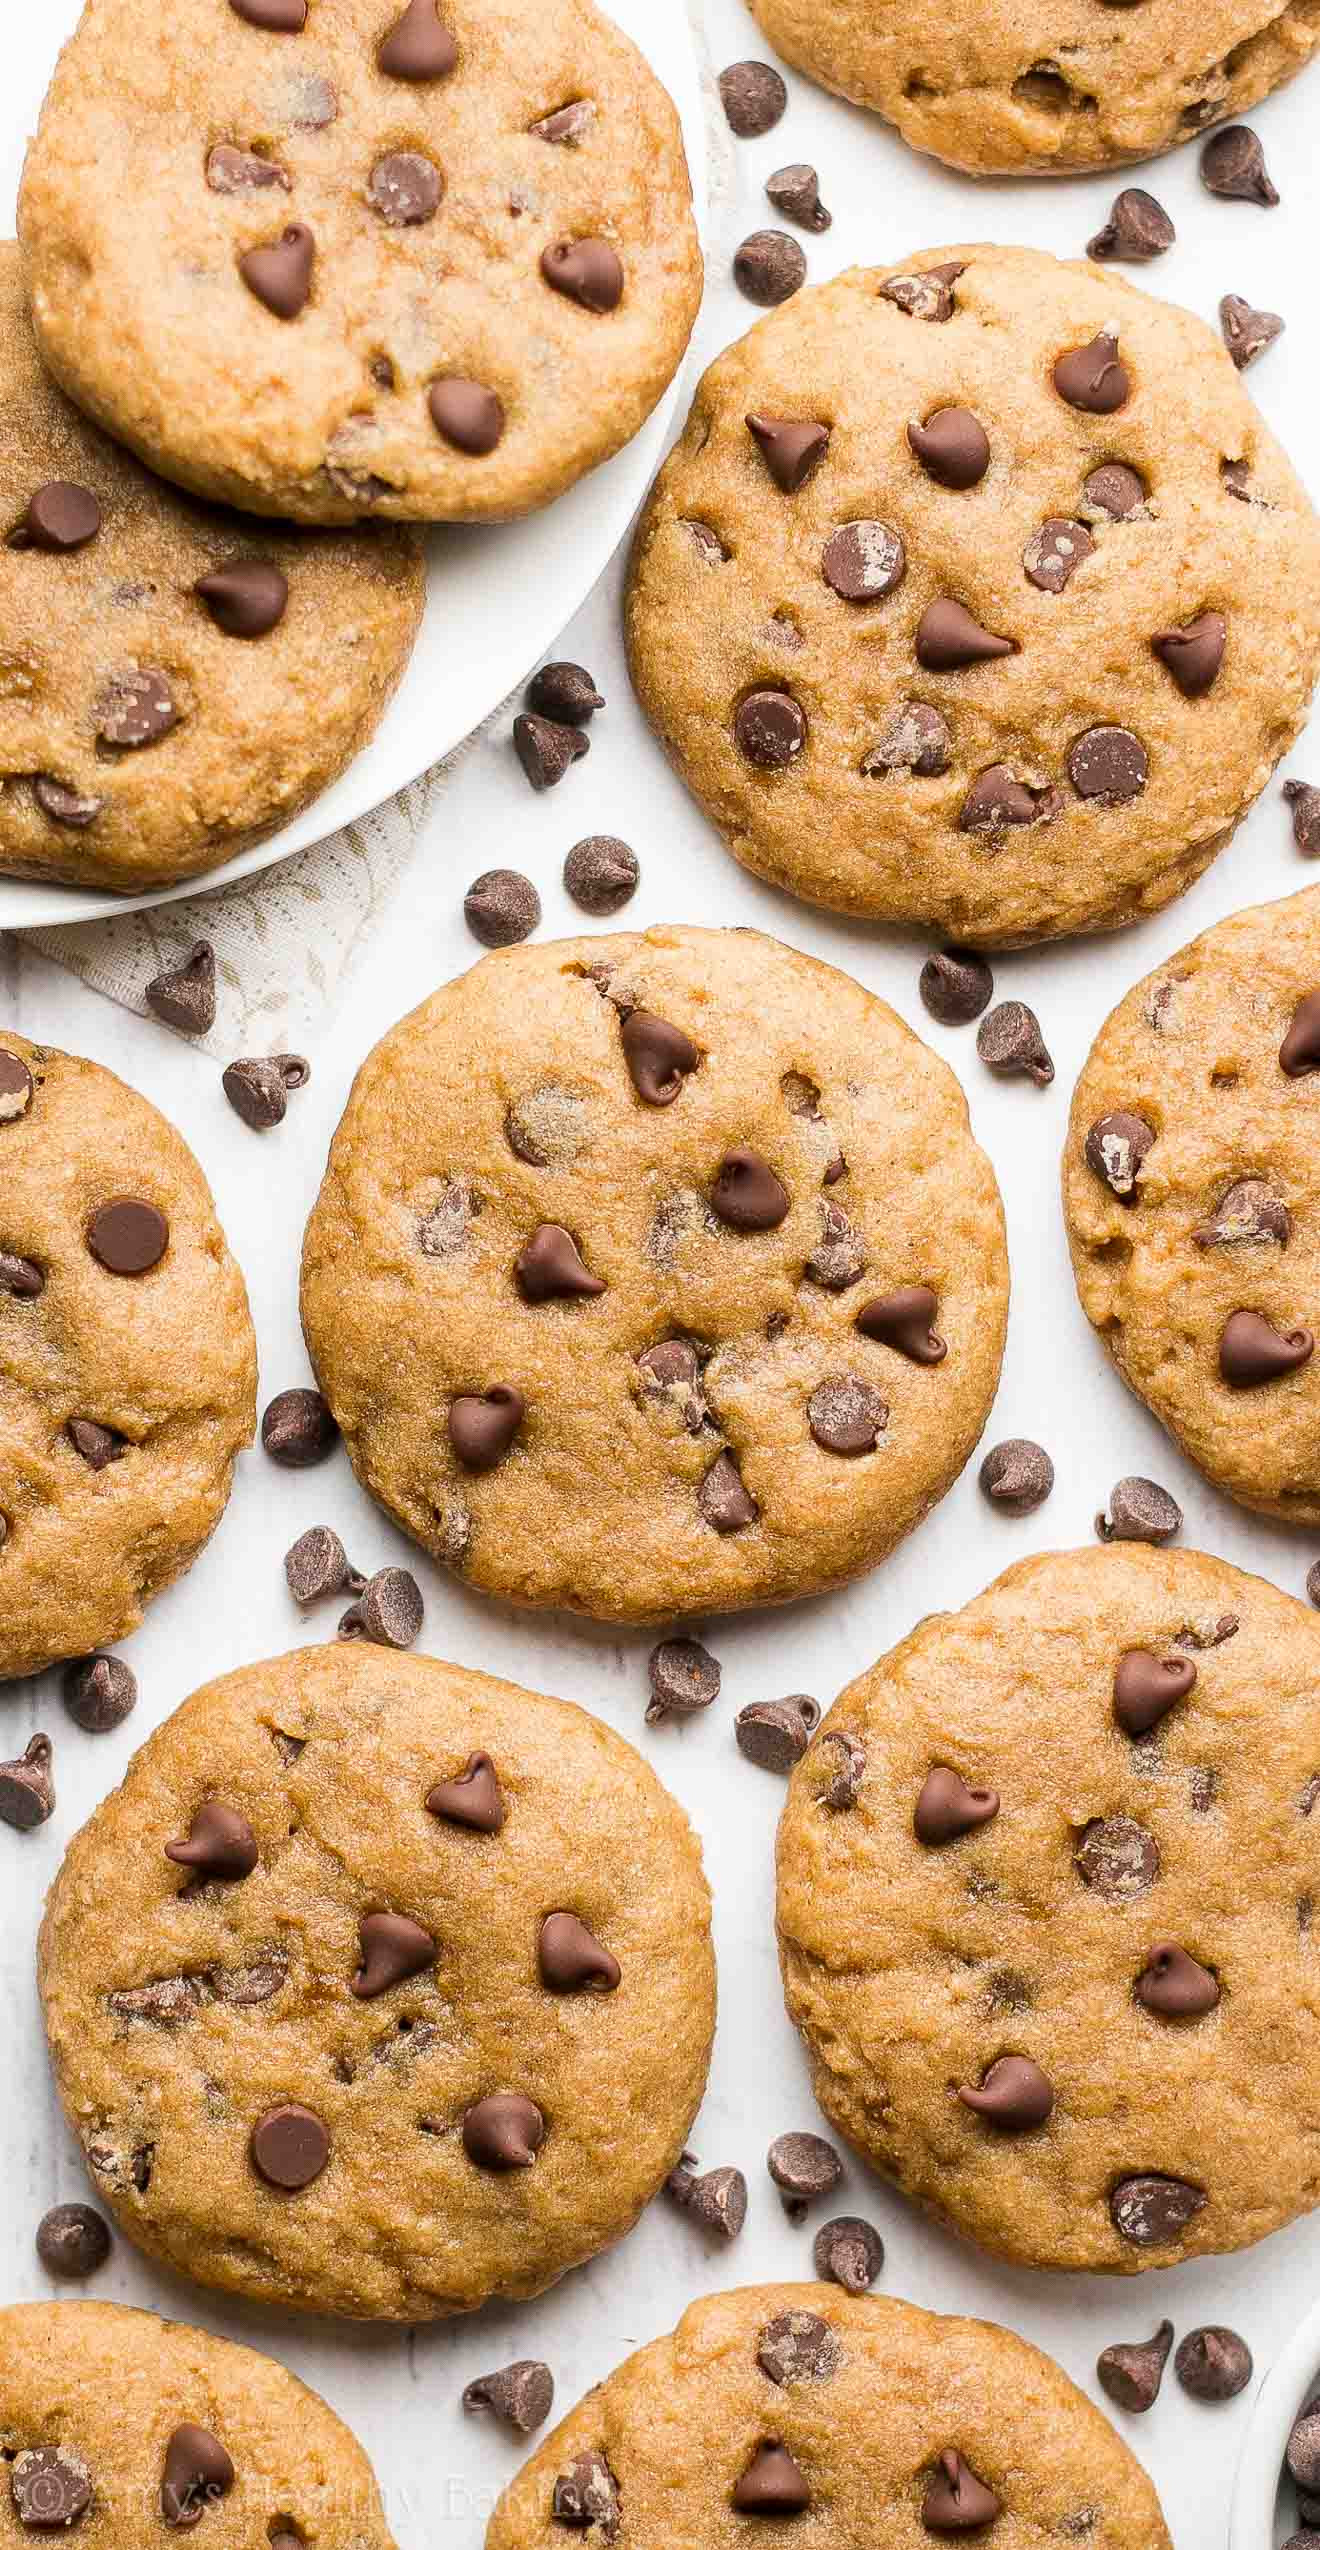 Healthy Chocolate Chip Cookies With Banana
 Healthy Banana Chocolate Chip Cookies Recipe Video